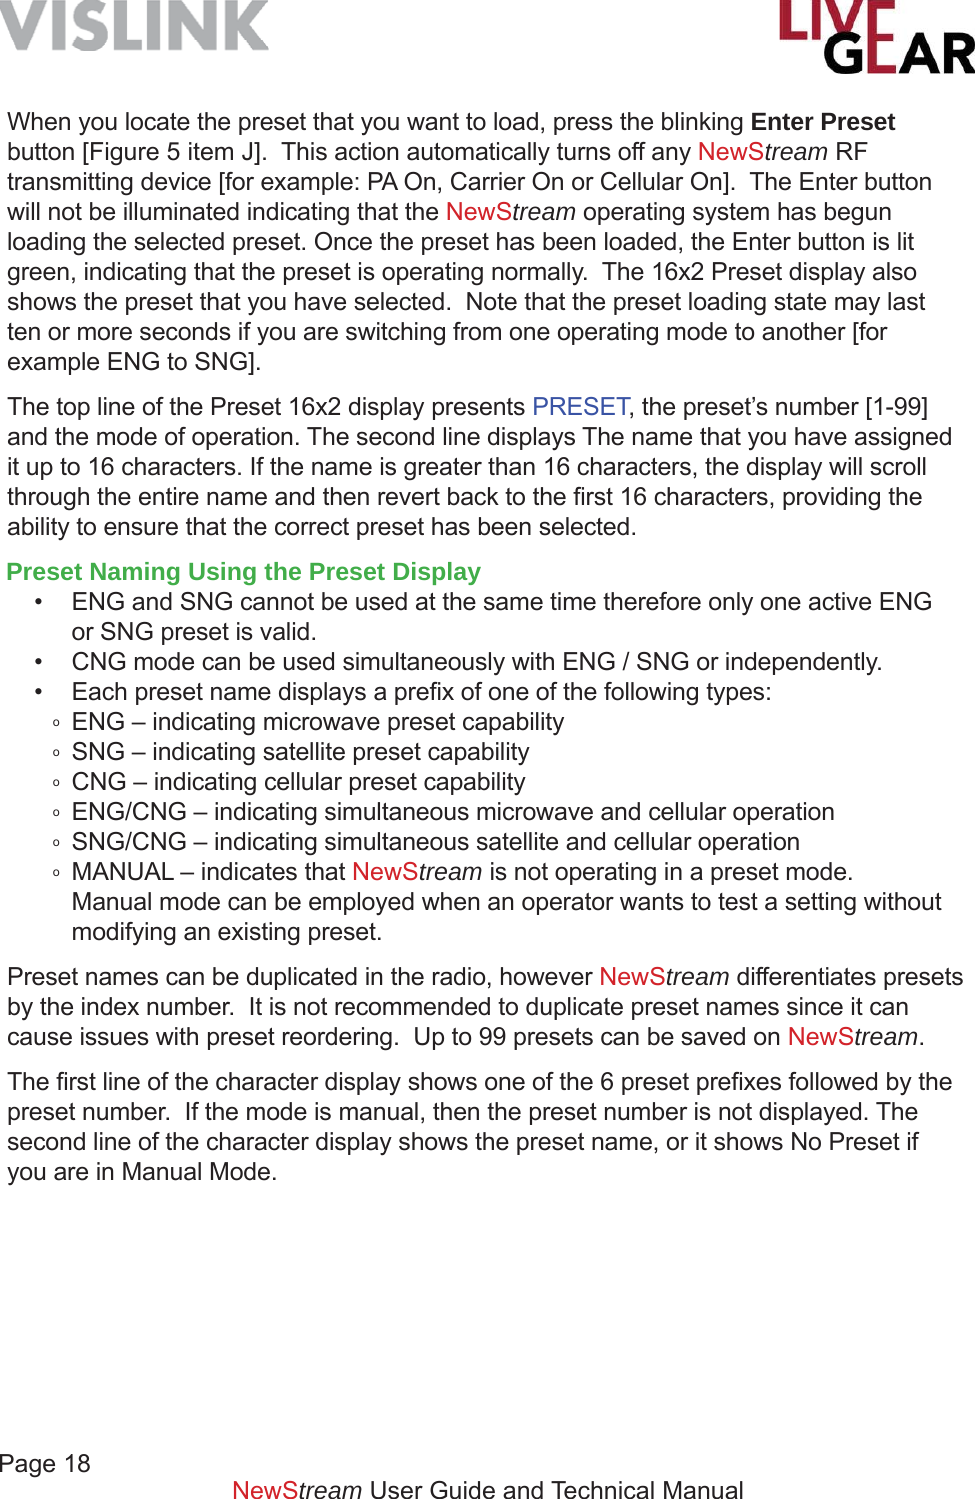 Page 18         NewStream User Guide and Technical ManualWhen you locate the preset that you want to load, press the blinking Enter Preset button [Figure 5 item J].  This action automatically turns off any NewStream RF transmitting device [for example: PA On, Carrier On or Cellular On].  The Enter button will not be illuminated indicating that the NewStream operating system has begun loading the selected preset. Once the preset has been loaded, the Enter button is lit green, indicating that the preset is operating normally.  The 16x2 Preset display also shows the preset that you have selected.  Note that the preset loading state may last ten or more seconds if you are switching from one operating mode to another [for example ENG to SNG].The top line of the Preset 16x2 display presents PRESET, the preset’s number [1-99] and the mode of operation. The second line displays The name that you have assigned it up to 16 characters. If the name is greater than 16 characters, the display will scroll through the entire name and then revert back to the ﬁ rst 16 characters, providing the ability to ensure that the correct preset has been selected.Preset Naming Using the Preset Display •  ENG and SNG cannot be used at the same time therefore only one active ENG    or SNG preset is valid.•  CNG mode can be used simultaneously with ENG / SNG or independently.•  Each preset name displays a preﬁ x of one of the following types:o  ENG – indicating microwave preset capabilityo  SNG – indicating satellite preset capabilityo  CNG – indicating cellular preset capabilityo  ENG/CNG – indicating simultaneous microwave and cellular operationo  SNG/CNG – indicating simultaneous satellite and cellular operationo  MANUAL – indicates that NewStream is not operating in a preset mode.  Manual mode can be employed when an operator wants to test a setting without    modifying an existing preset.Preset names can be duplicated in the radio, however NewStream differentiates presets by the index number.  It is not recommended to duplicate preset names since it can cause issues with preset reordering.  Up to 99 presets can be saved on NewStream. The ﬁ rst line of the character display shows one of the 6 preset preﬁ xes followed by the preset number.  If the mode is manual, then the preset number is not displayed. The second line of the character display shows the preset name, or it shows No Preset if you are in Manual Mode. 